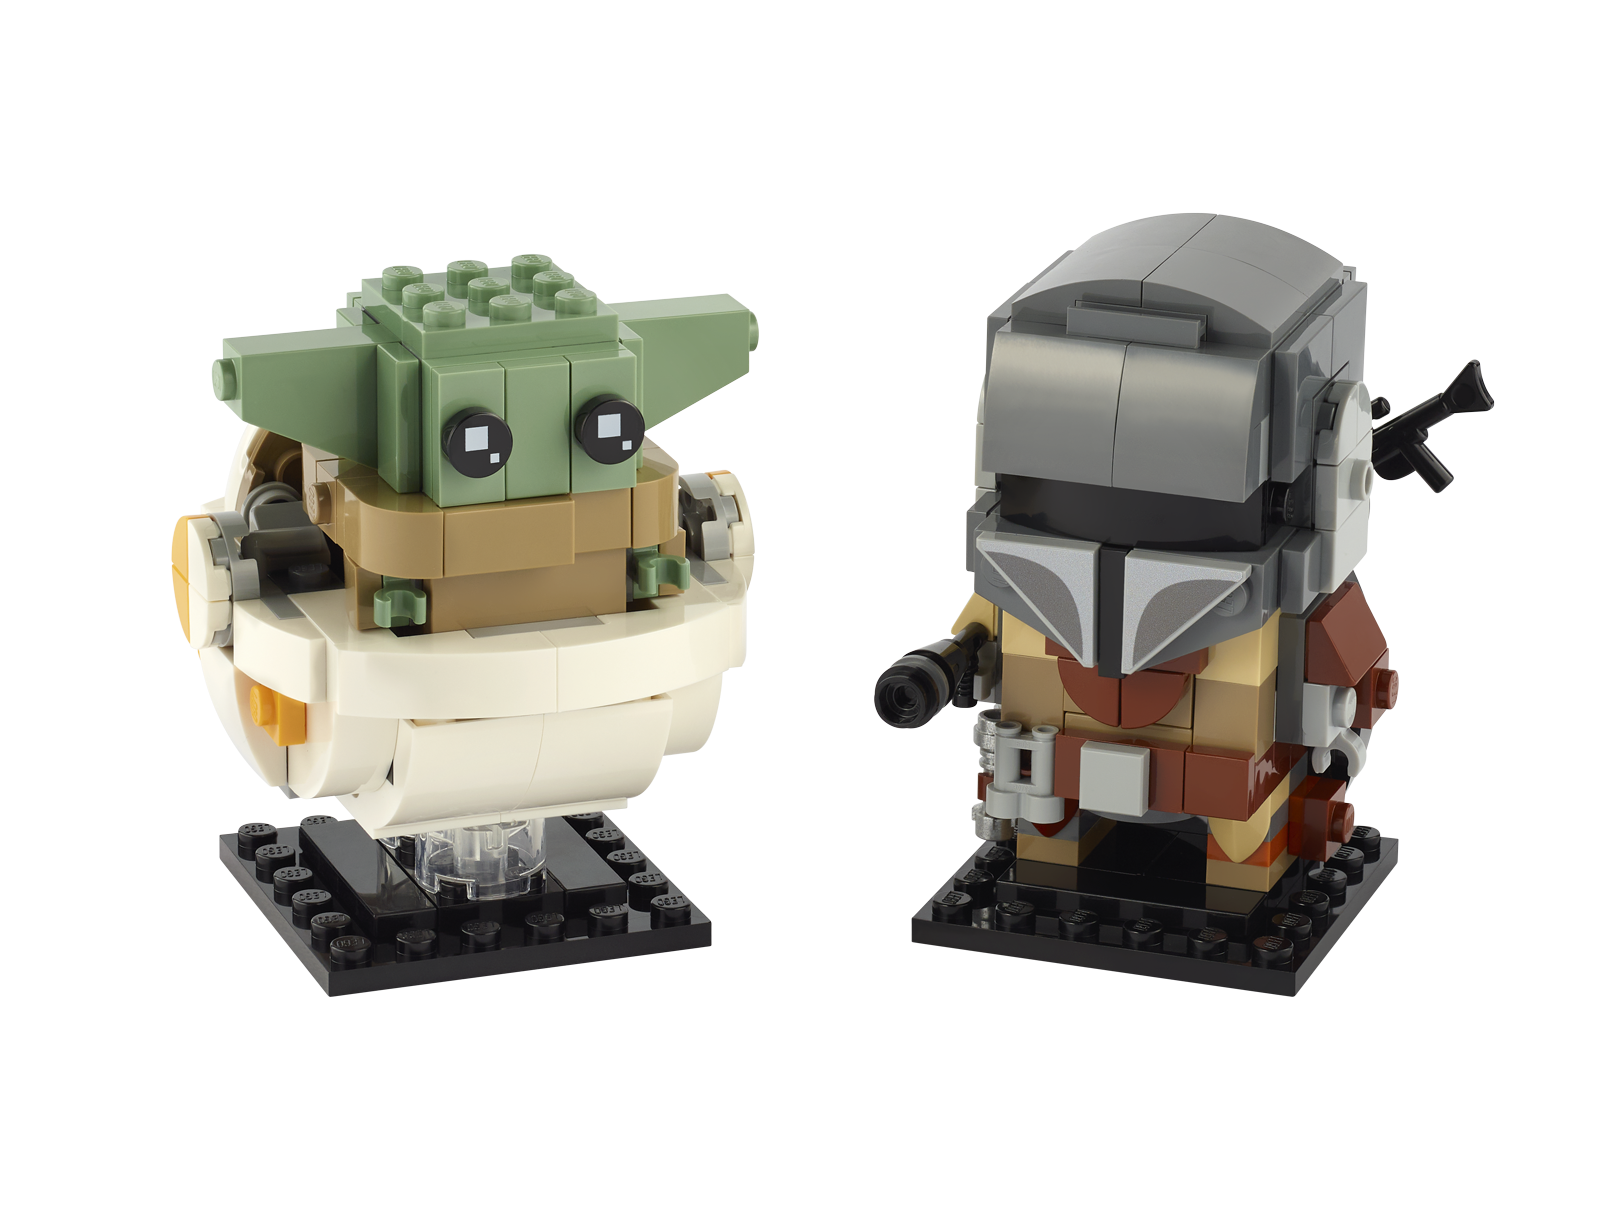 STAR WARS MANDALORIAN & The Child MINIFIGARE PLAY WITH LEGOS USA listing 